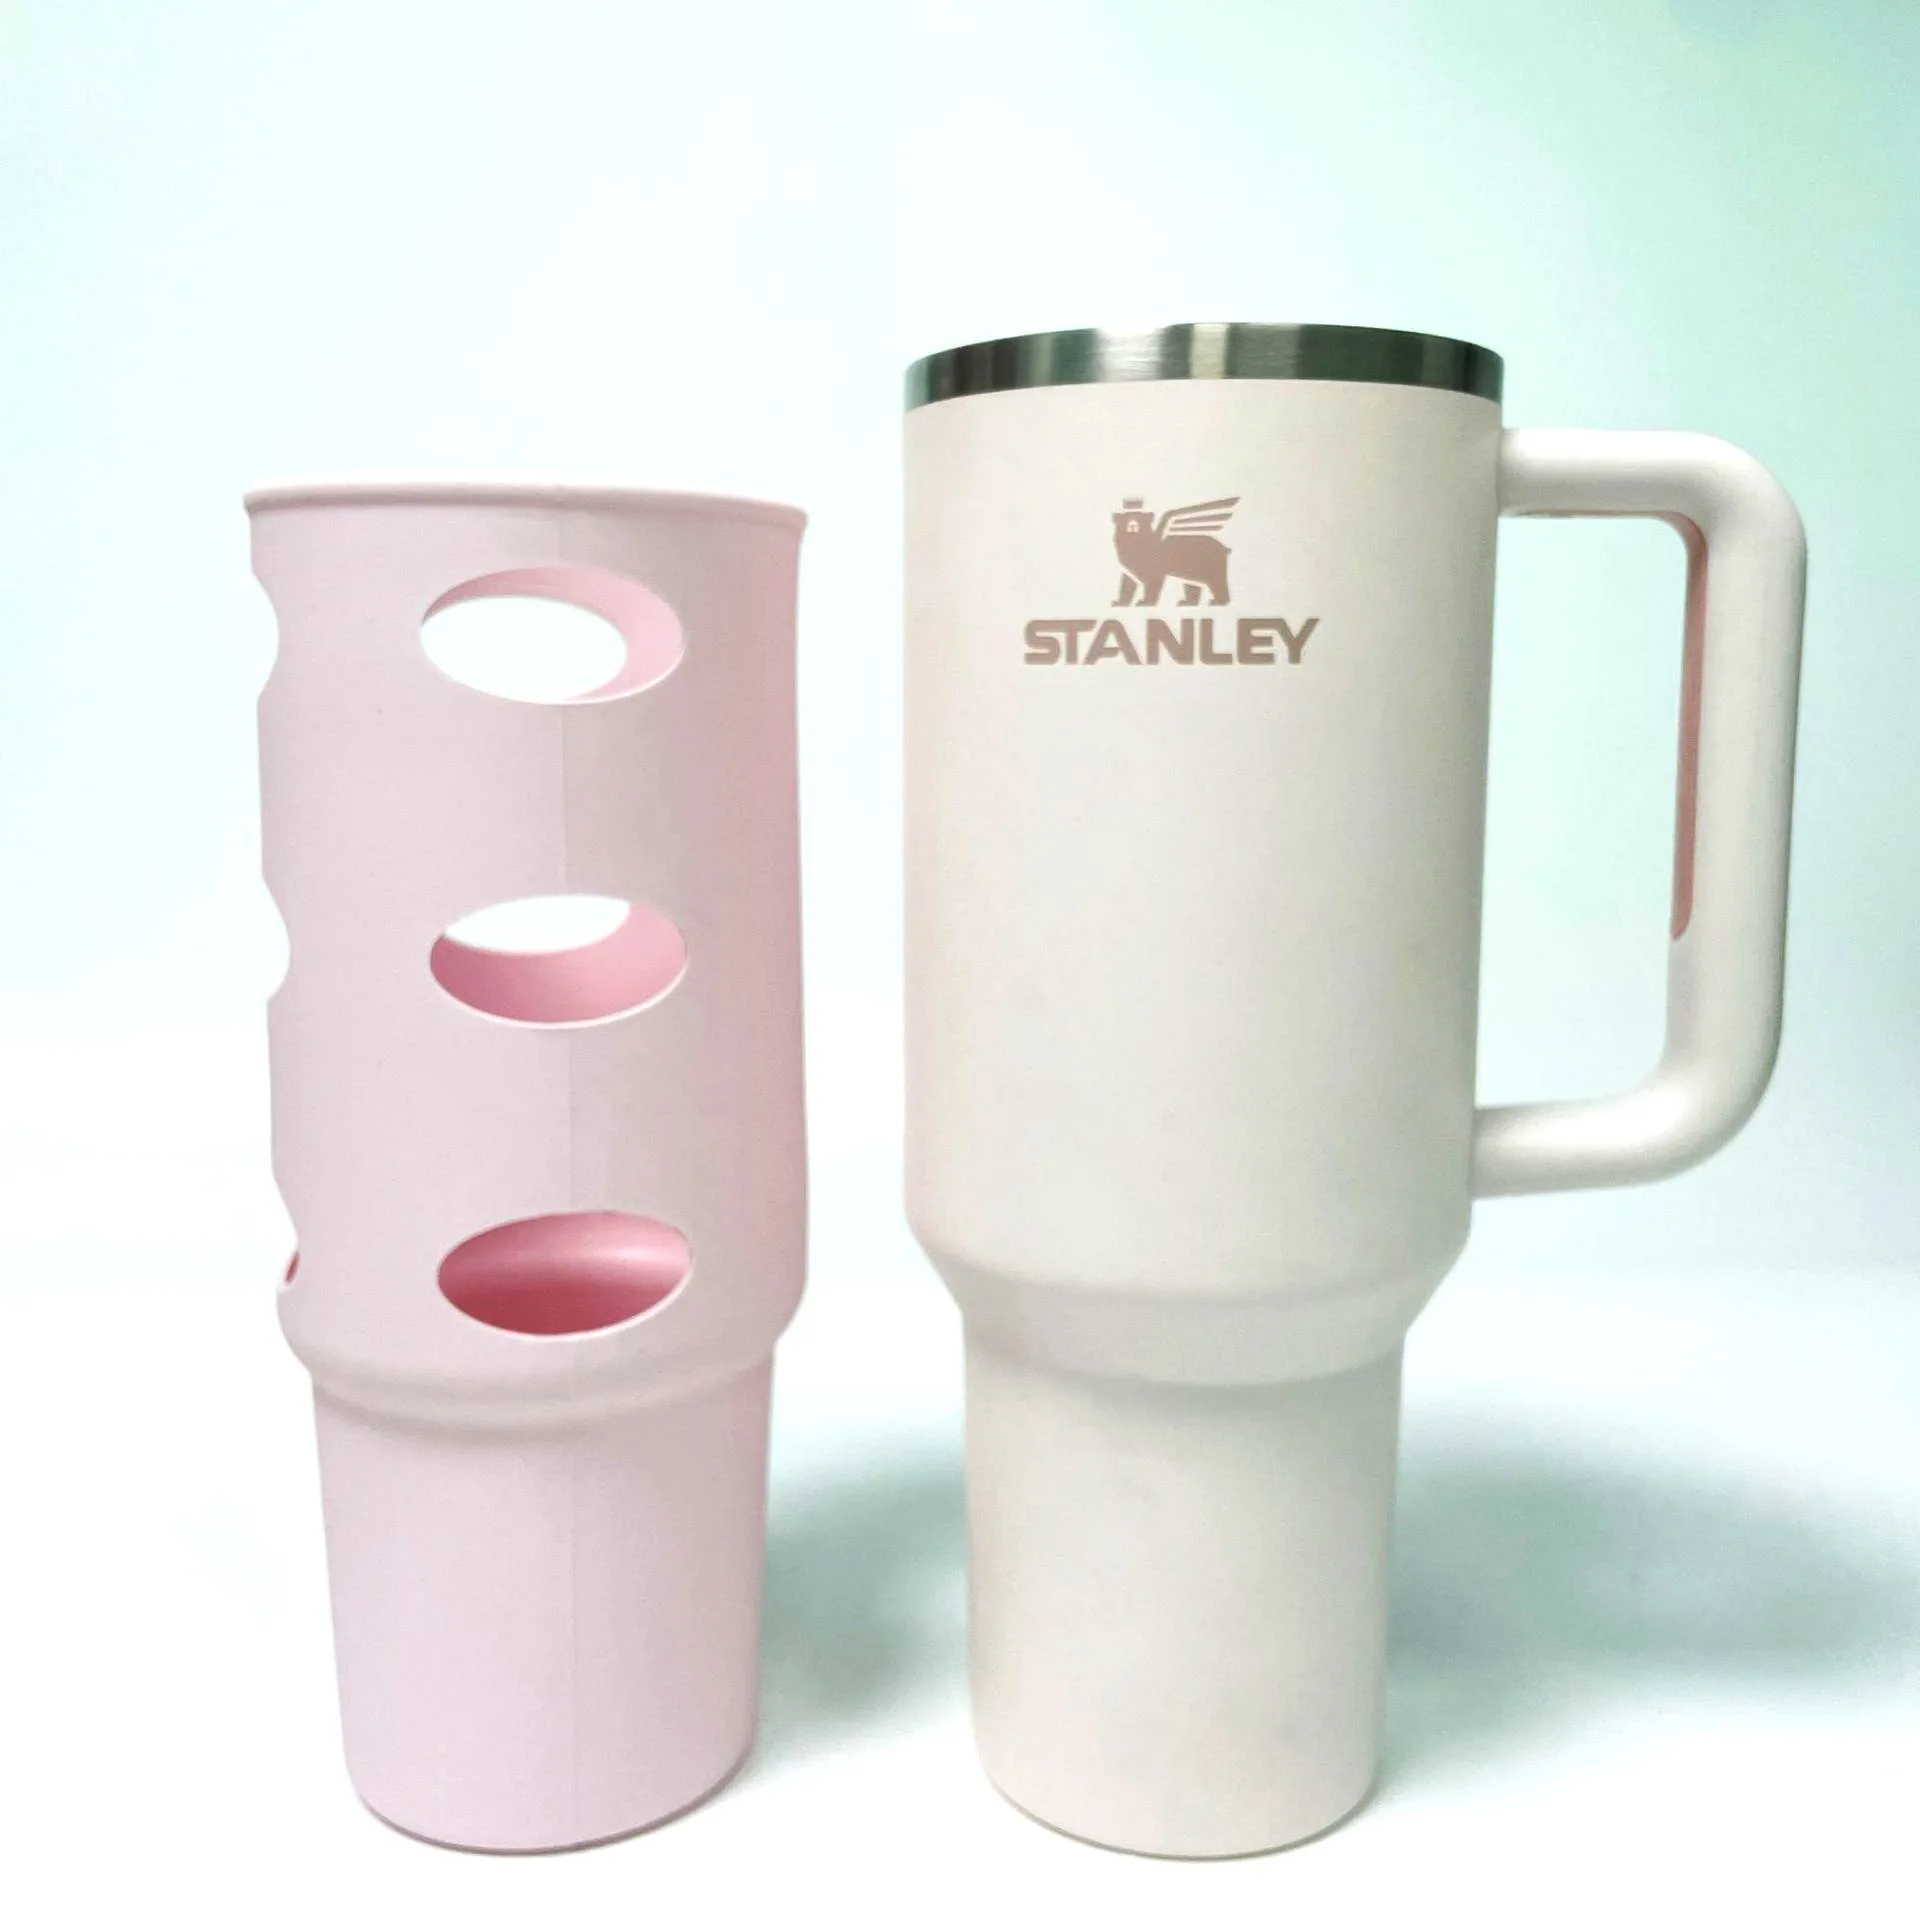 https://ae01.alicdn.com/kf/Sd60c57cd9e654940aed0d42b409aac1dK/Stanley-Insulating-Cup-Silicone-Cover-Ice-Fighter-Cup-Fall-Protection-Cover-30-40oz-Stanley-Water-Cup.jpg